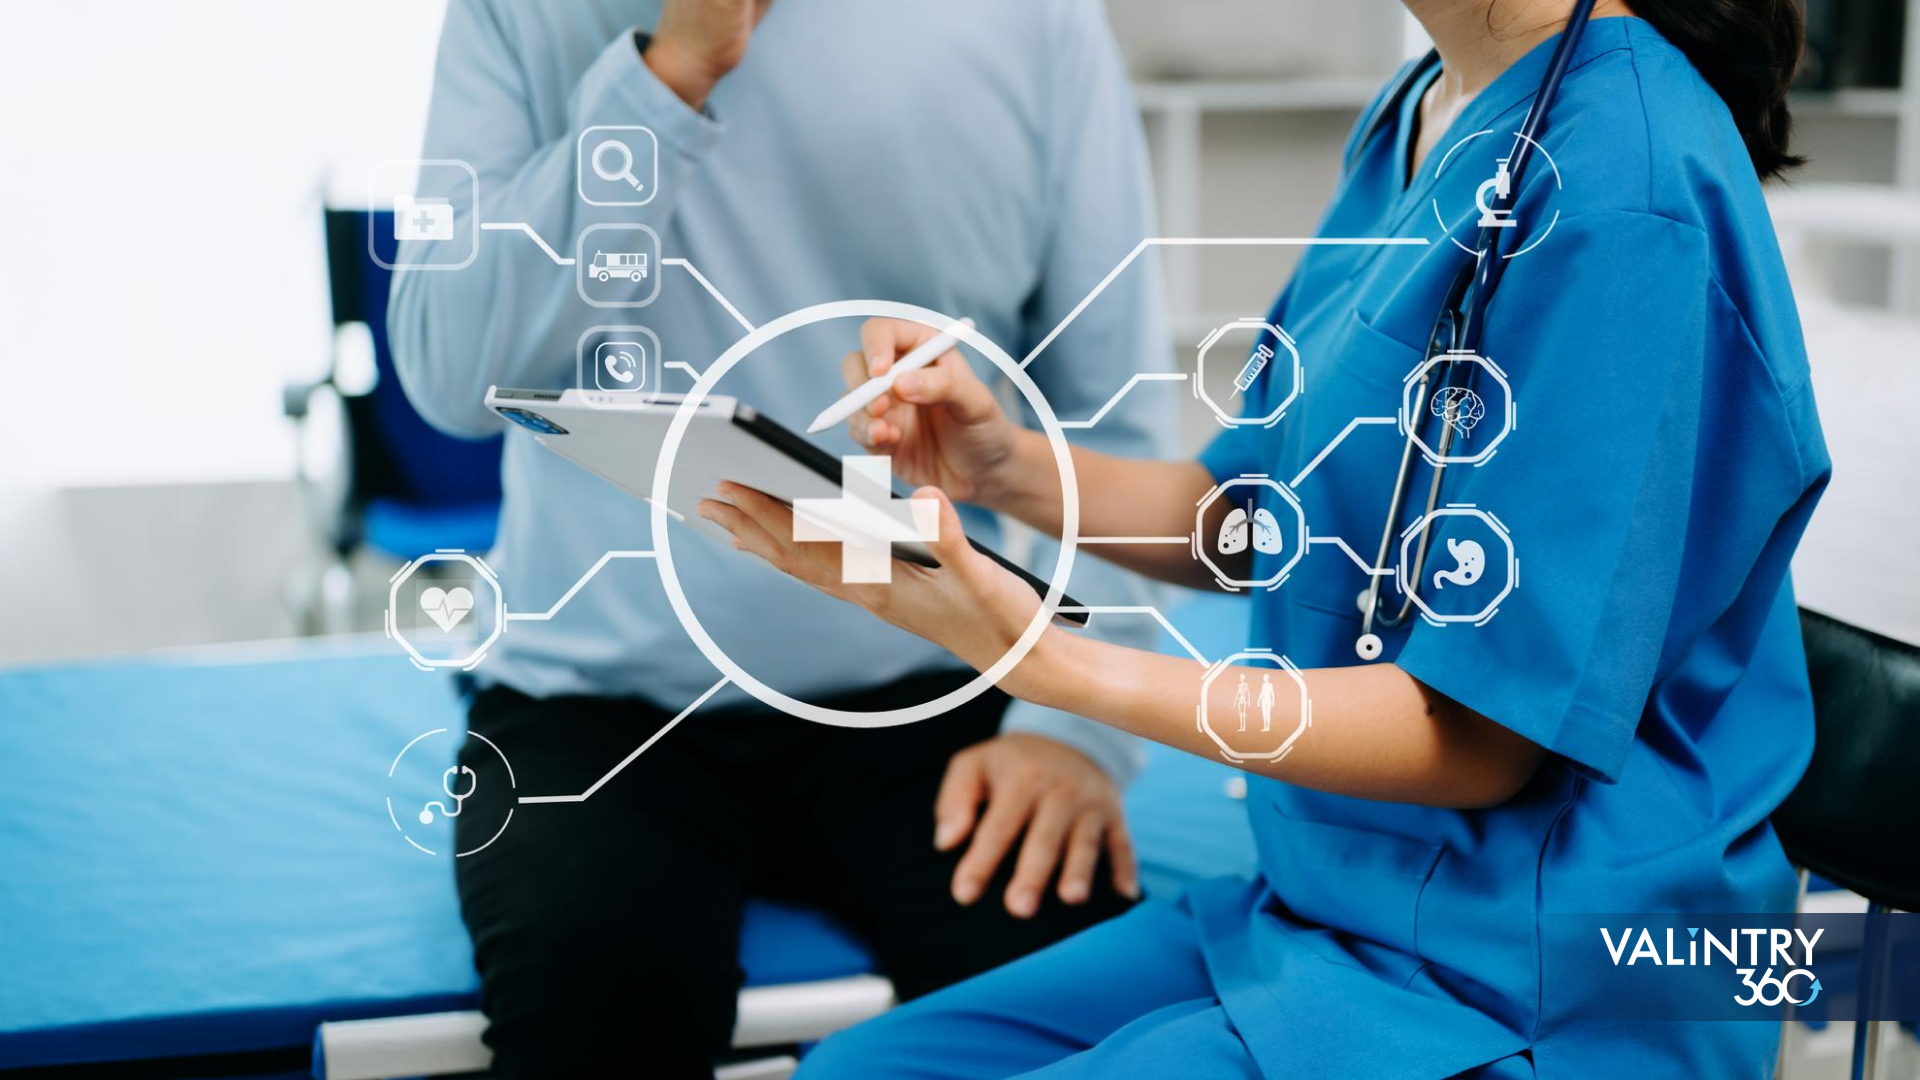 Enhance the Quality of Care with a Unified Digital Platform